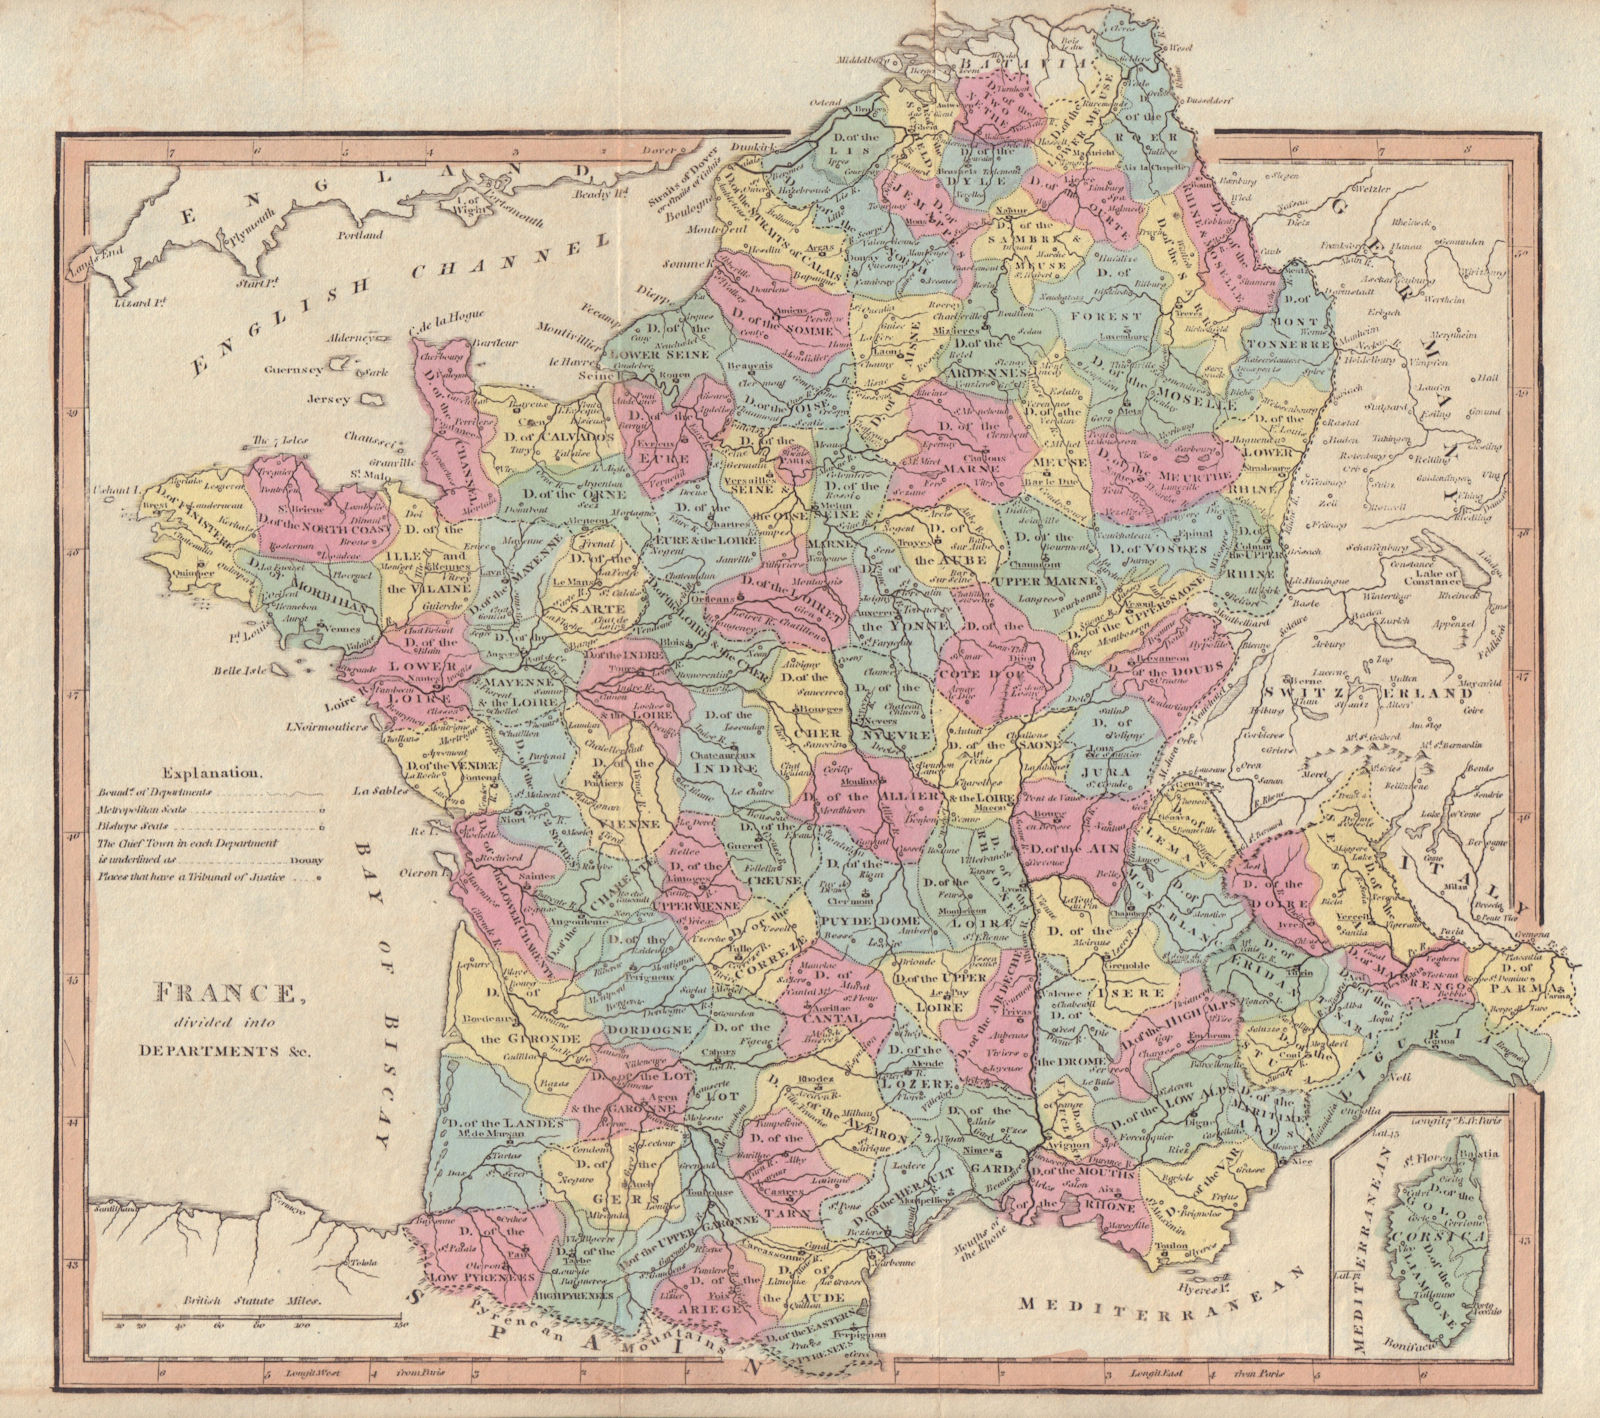 France divided into Departments. First French Empire/Republic. COOKE 1817 map